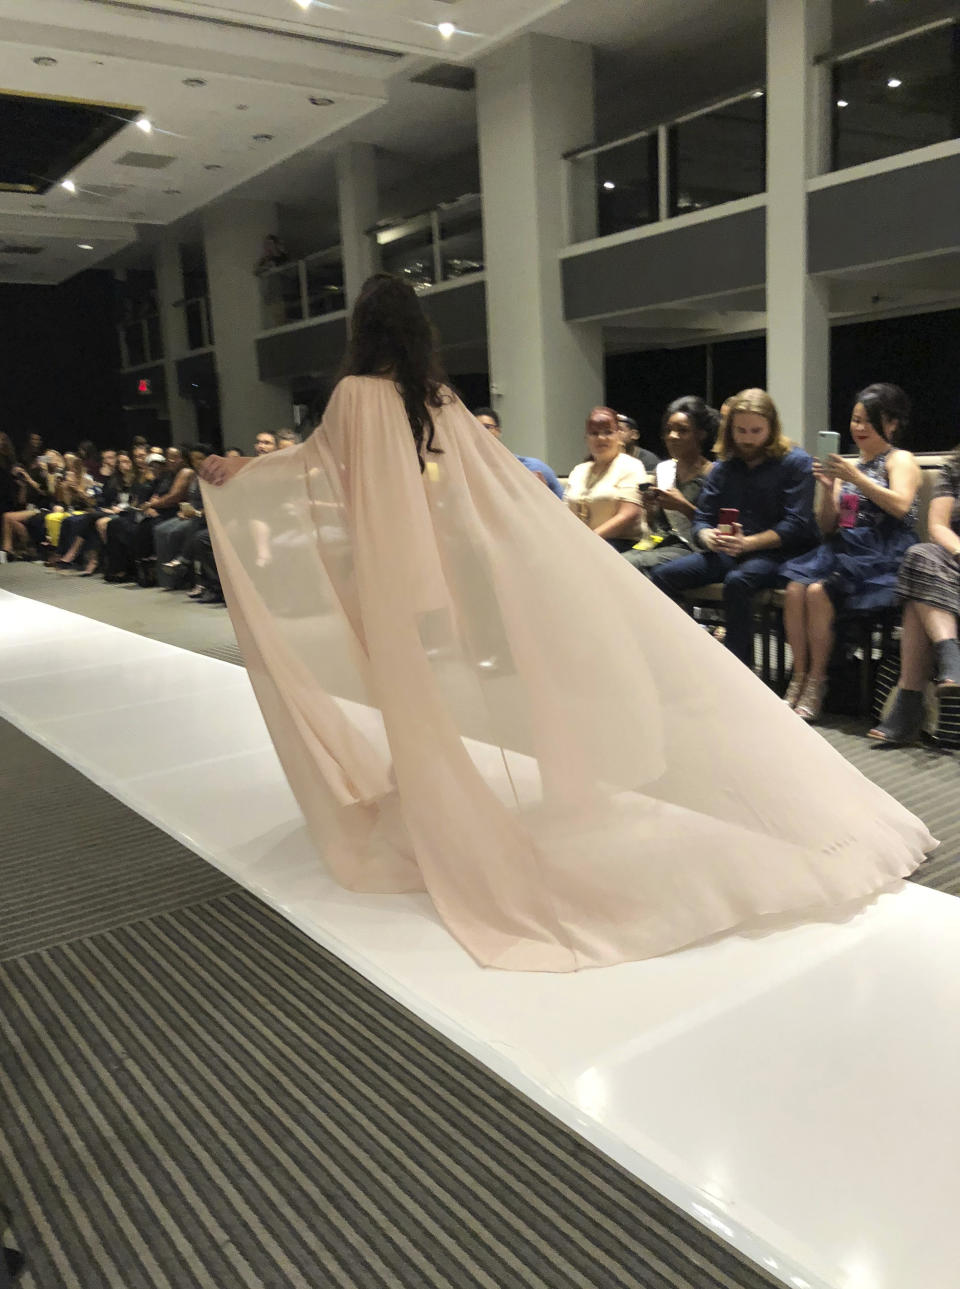 Model Marian Avila wears an outfit from the Talisha White 2019 spring collection on the runway during Fashion Week, Saturday, Sept. 8, 2018, in New York. Avila, a 21-year-old Spanish model with Down syndrome, fulfilled her dream to walk at New York Fashion Week thanks to White, the Atlanta designer she met through the magic of social media. (AP Photo/Leanne Italie)